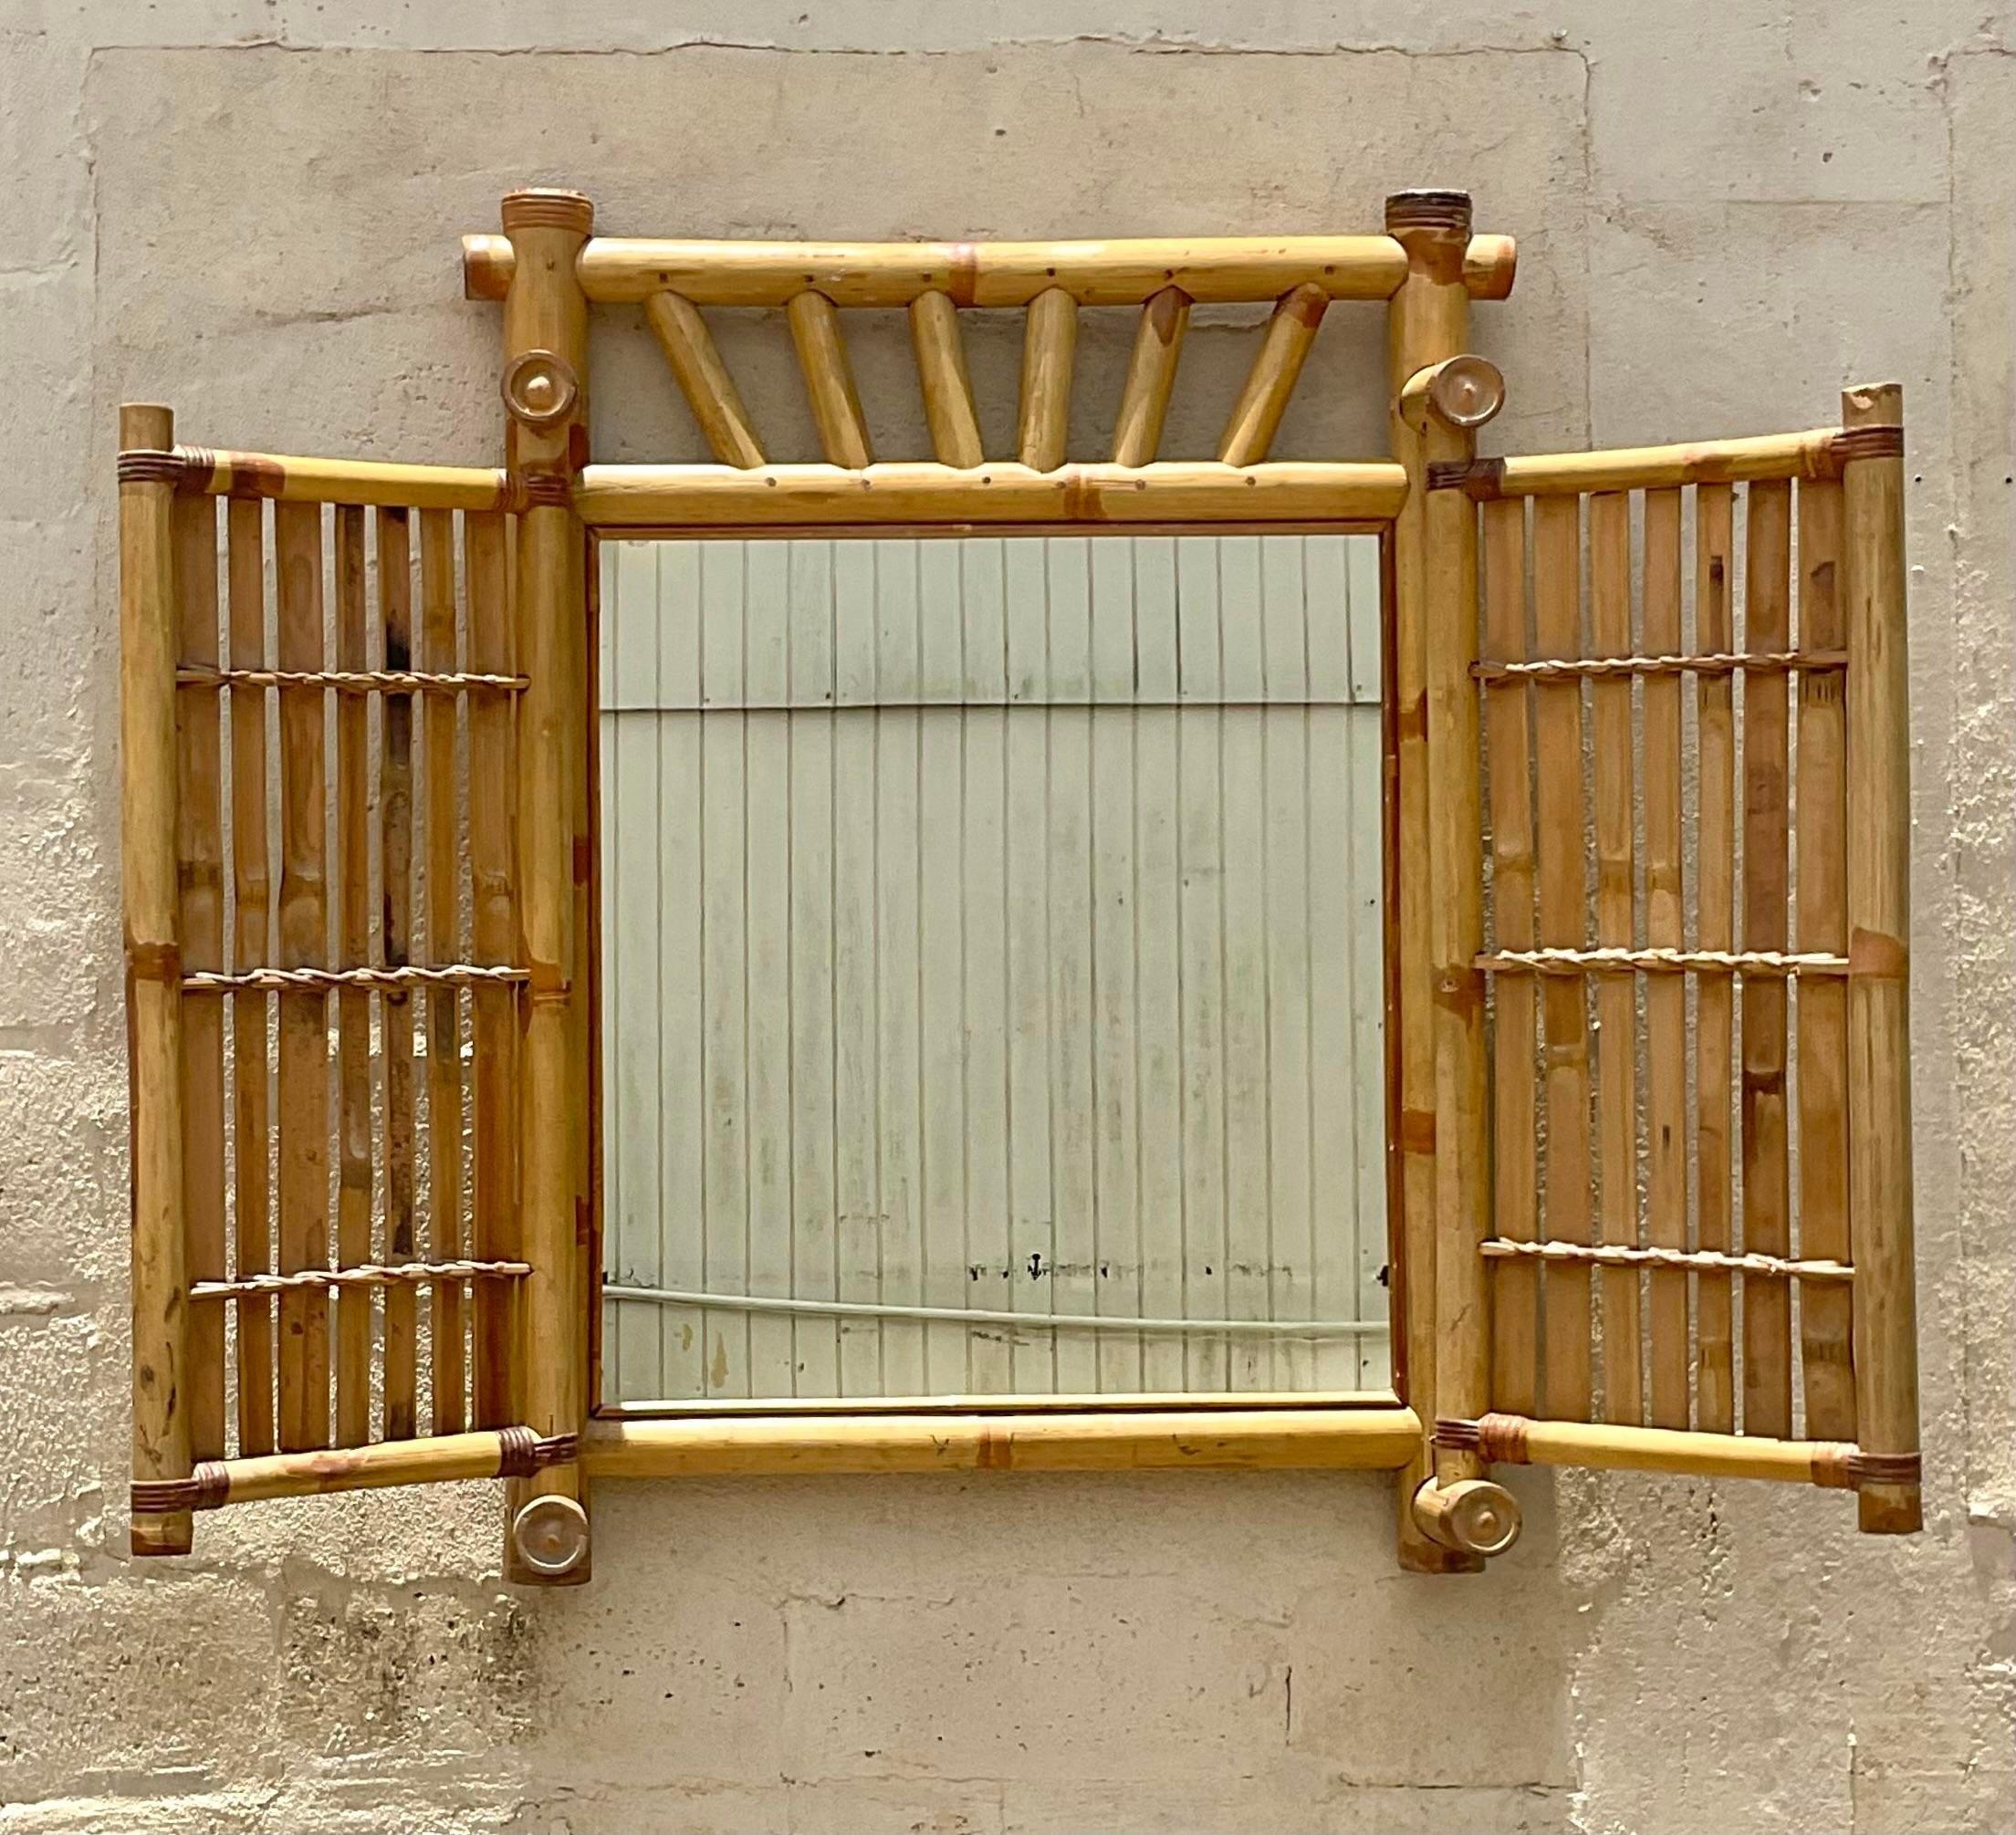 A fabulous vintage Costal wall mirror. A chic thick bamboo construction with a double door design. Acquired from a Palm Beach estate.

Doors open width 57 inches 